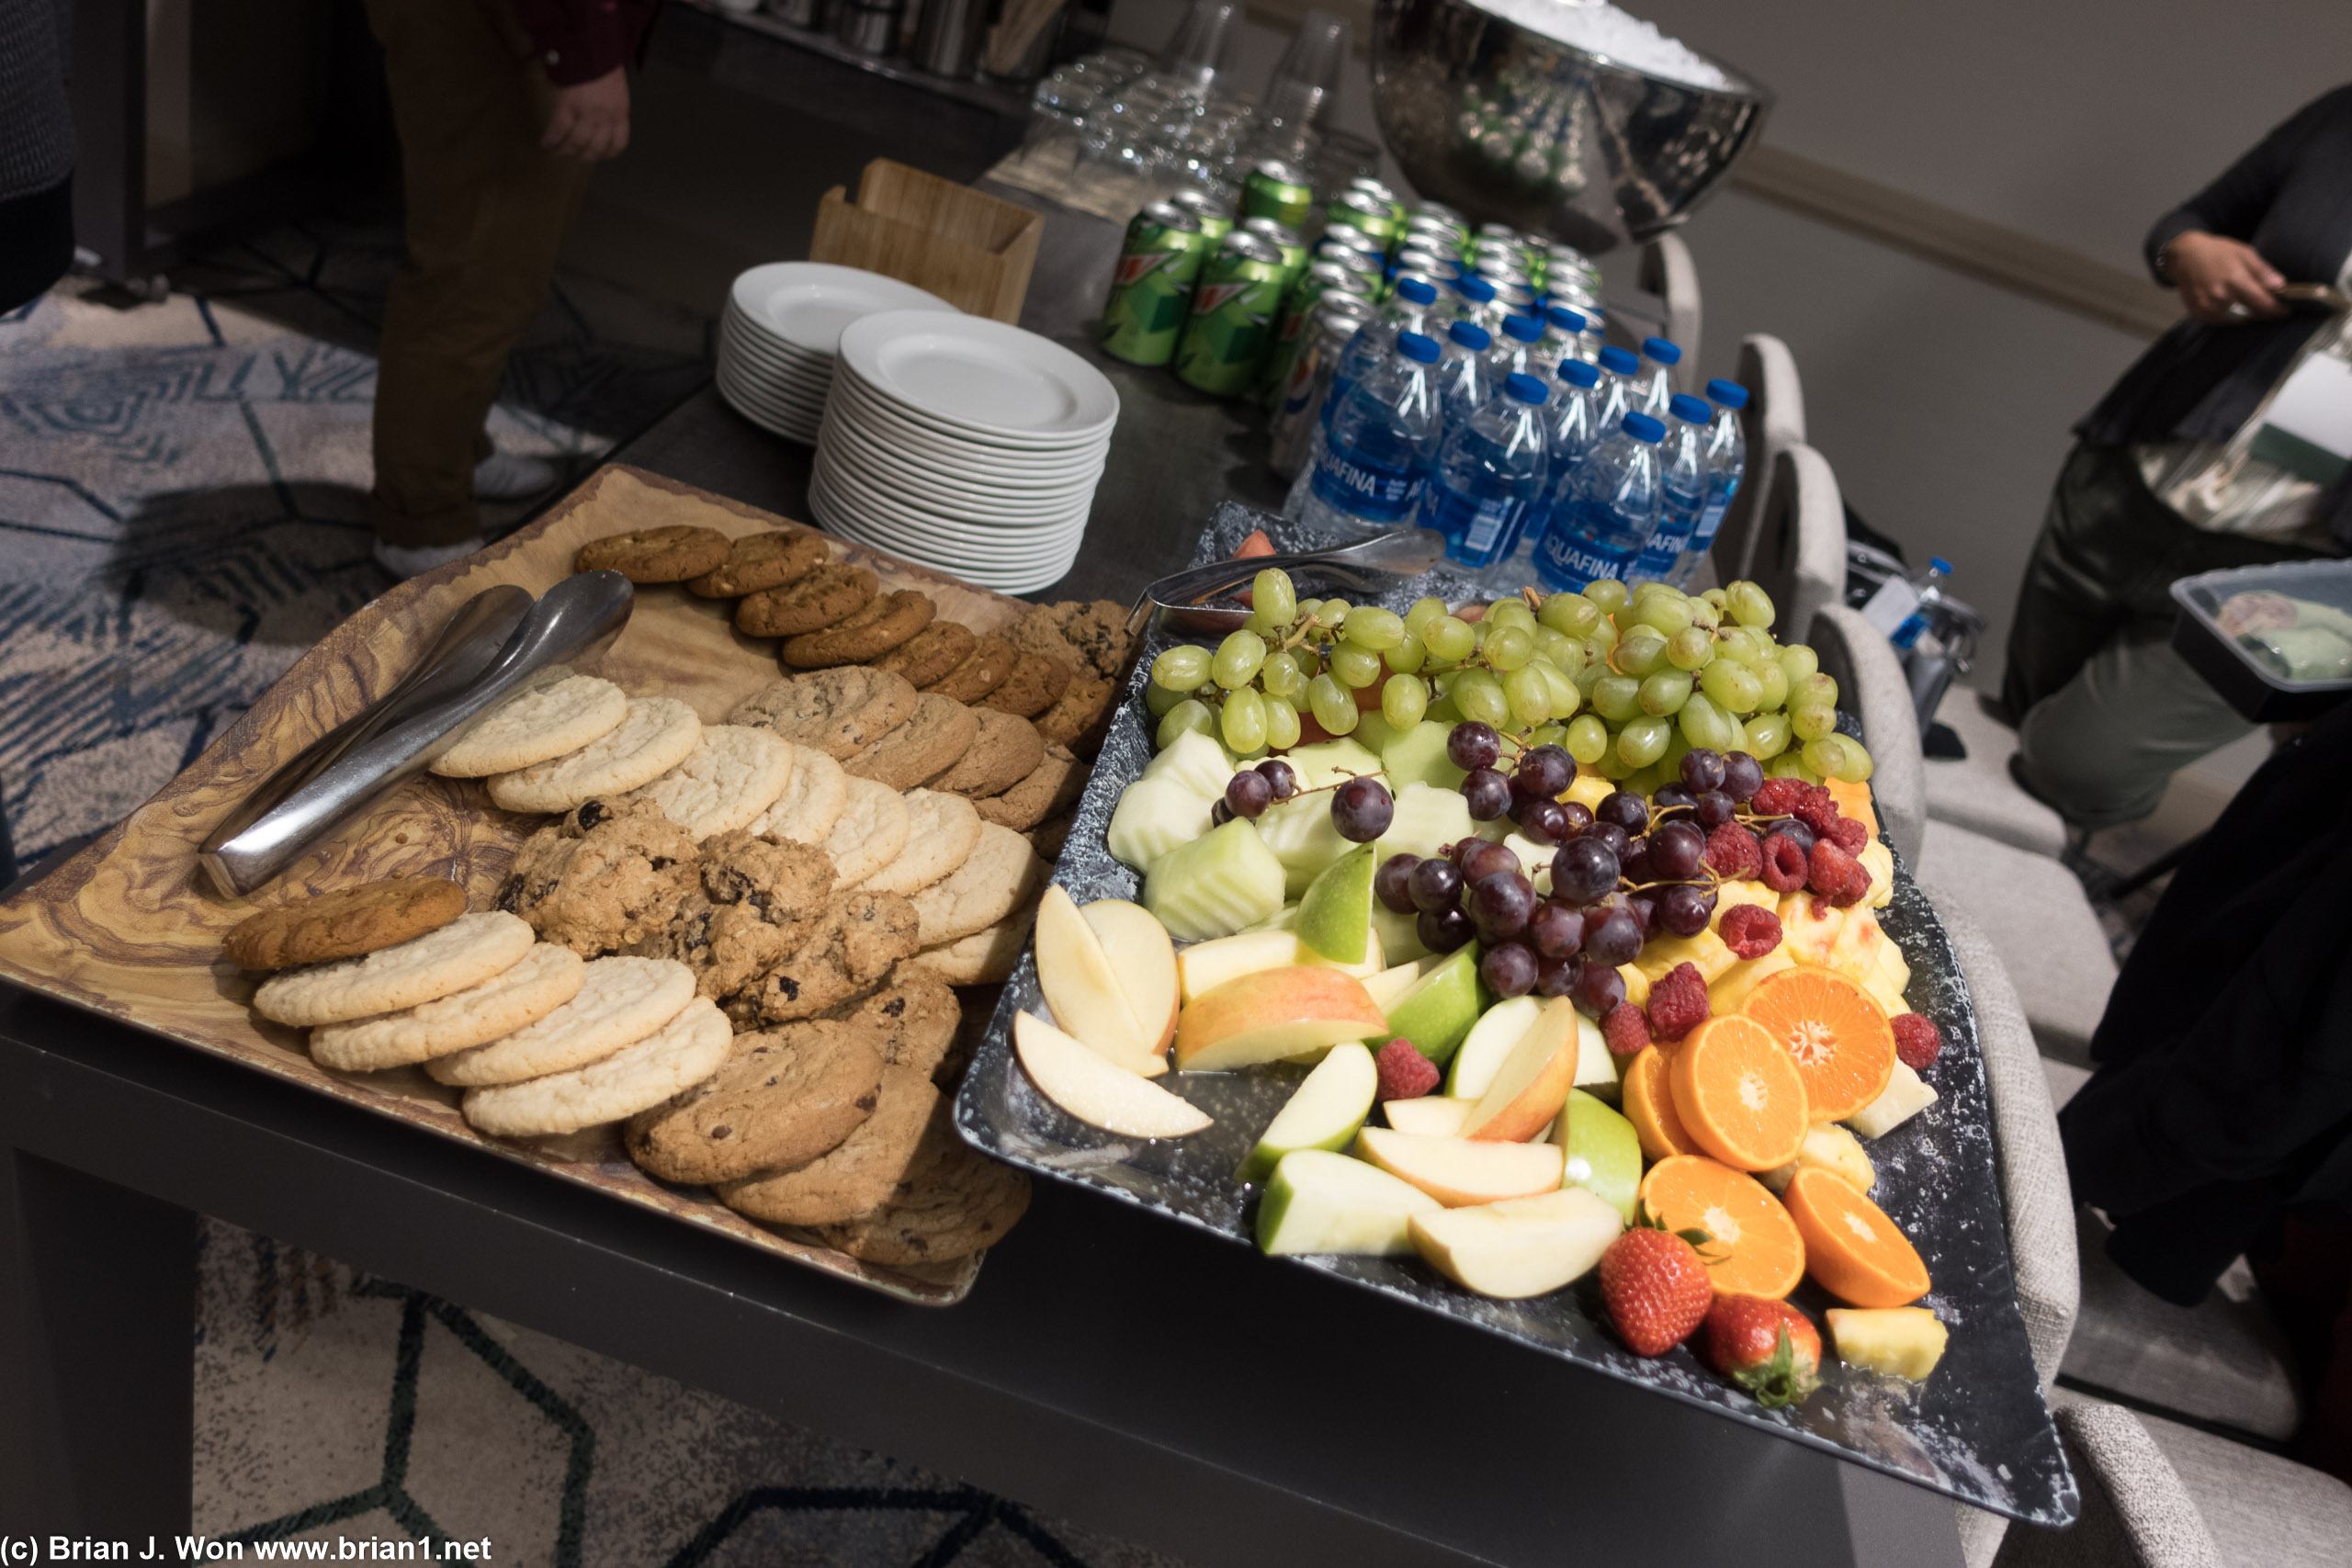 One of the sessions next door had snacks.